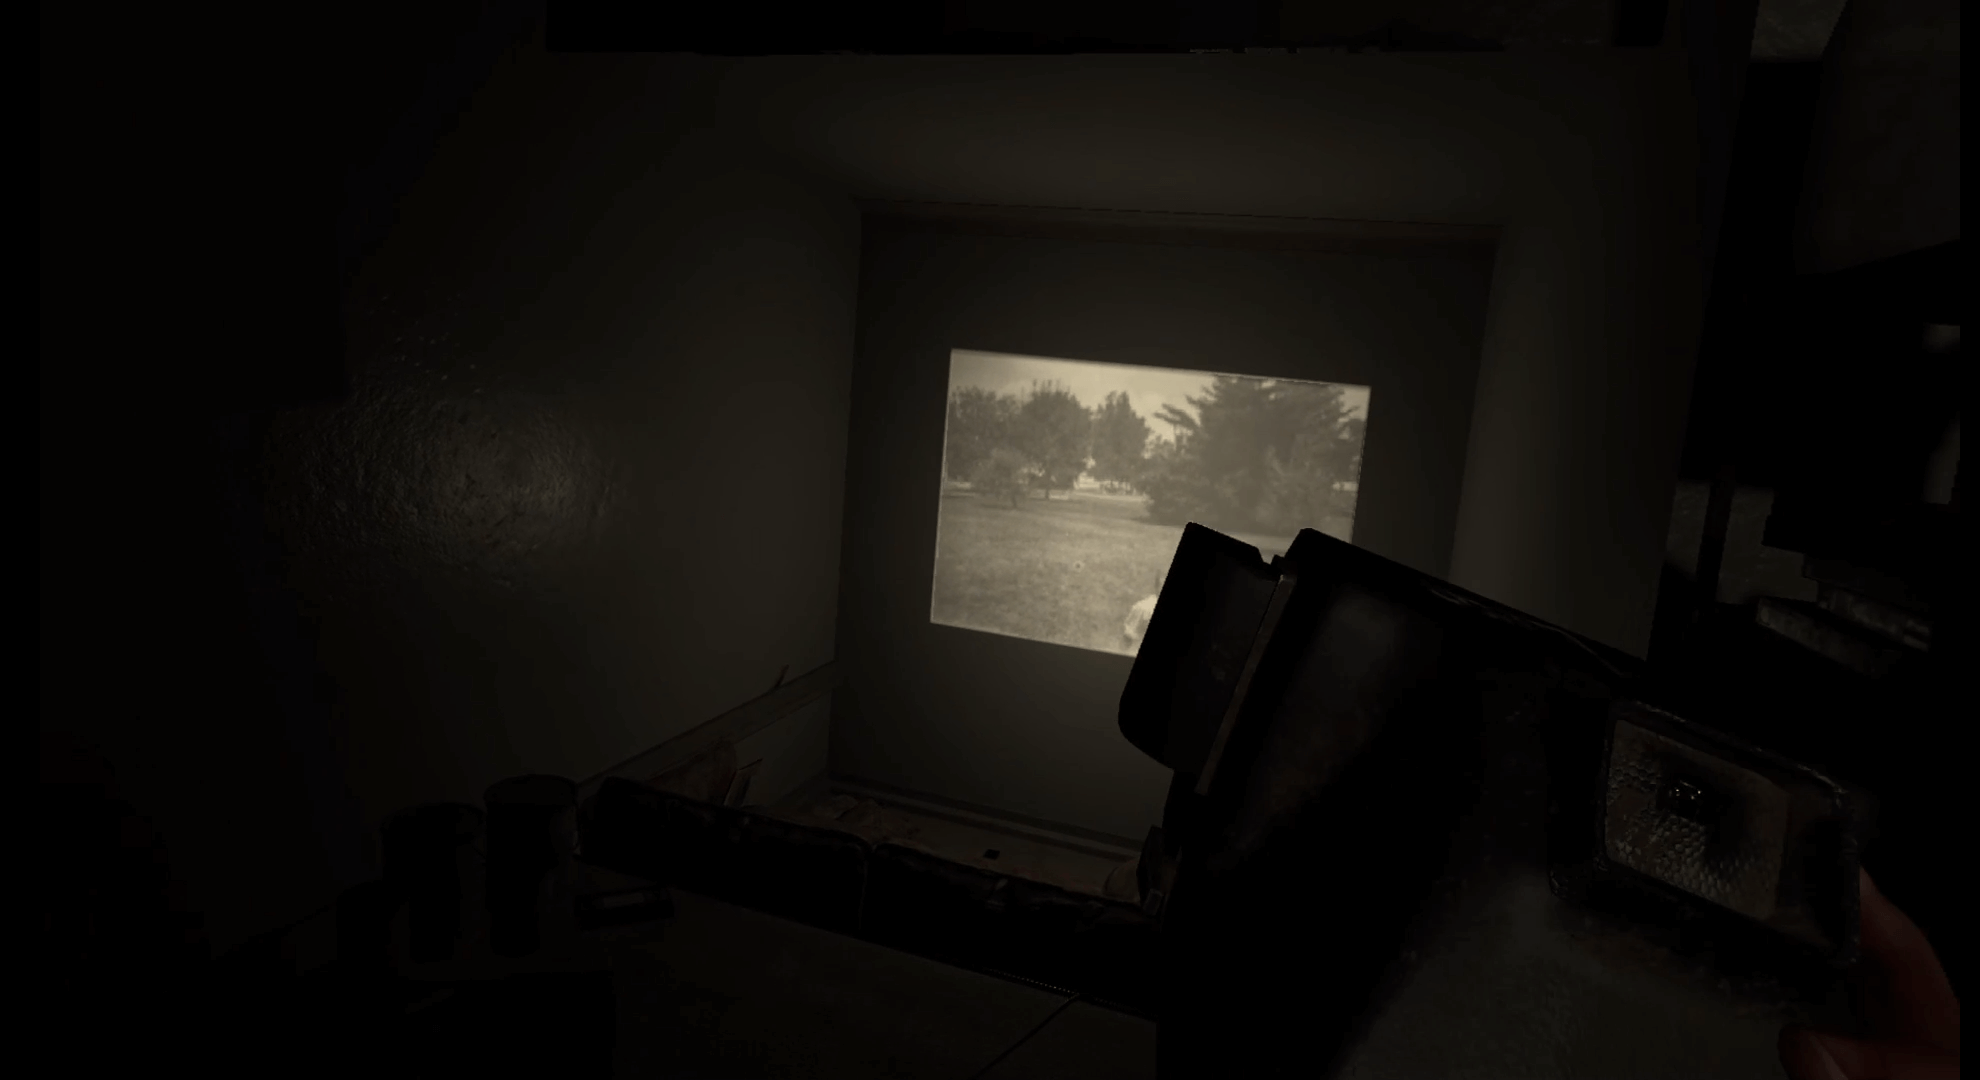 screenshot from Madison VR. a polaroid camera is held out in front. a theatre room for showing family photos from a projector is in front of us. on the wall a phot is projected. the back and white photo shows a young boy on a field with trees in the background